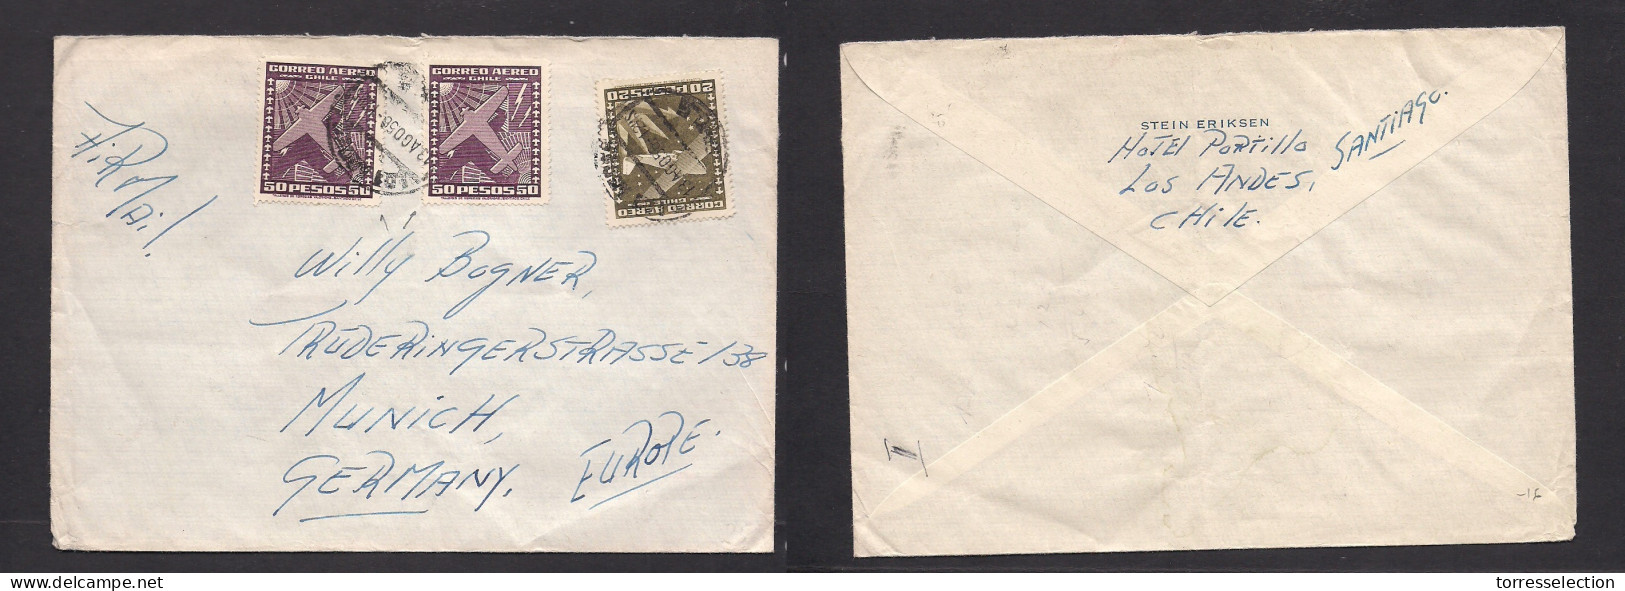 Chile - XX. 1956 (13 Aug) Los Andes - Germany, Munich. Air Multifkd Env At 120 Pesos Rate. XSALE. - Chile